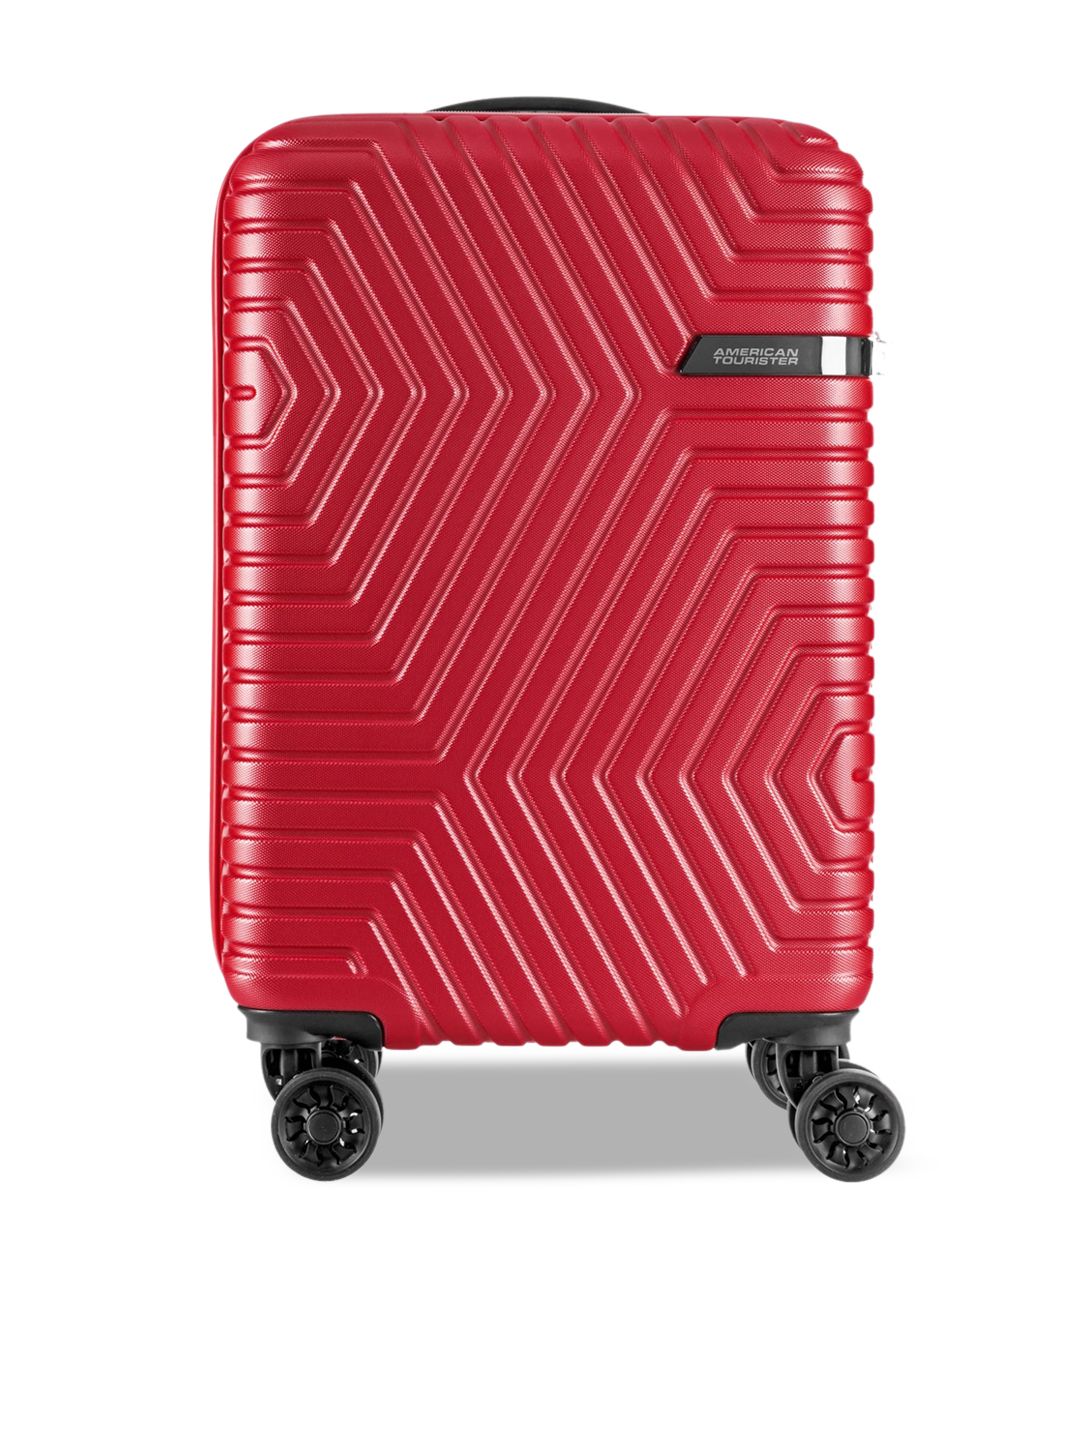 AMERICAN TOURISTER Red Textured Hard-Sided Medium Trolley Suitcase Price in India